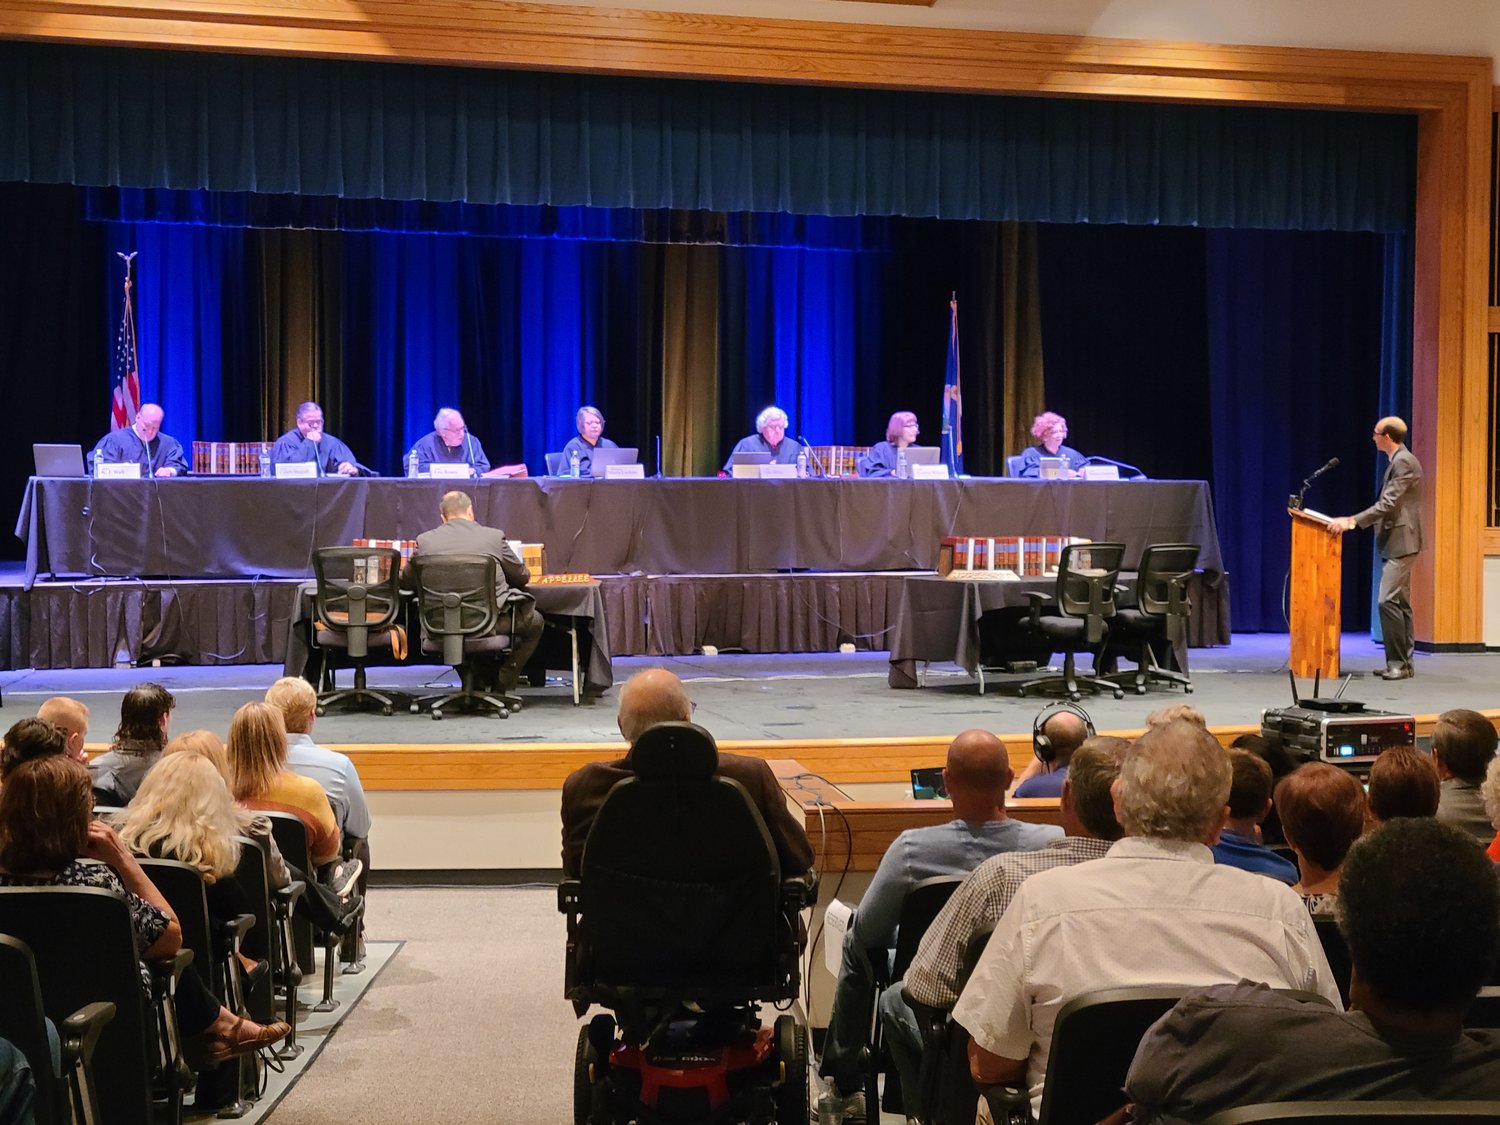 The Kansas Supreme Court hears an oral argument from the counsel for the appellant, Kasper Schirer, for the case State of Kansas v. Richard I. Moler II at the special session in the Parsons High School auditorium on Monday evening.